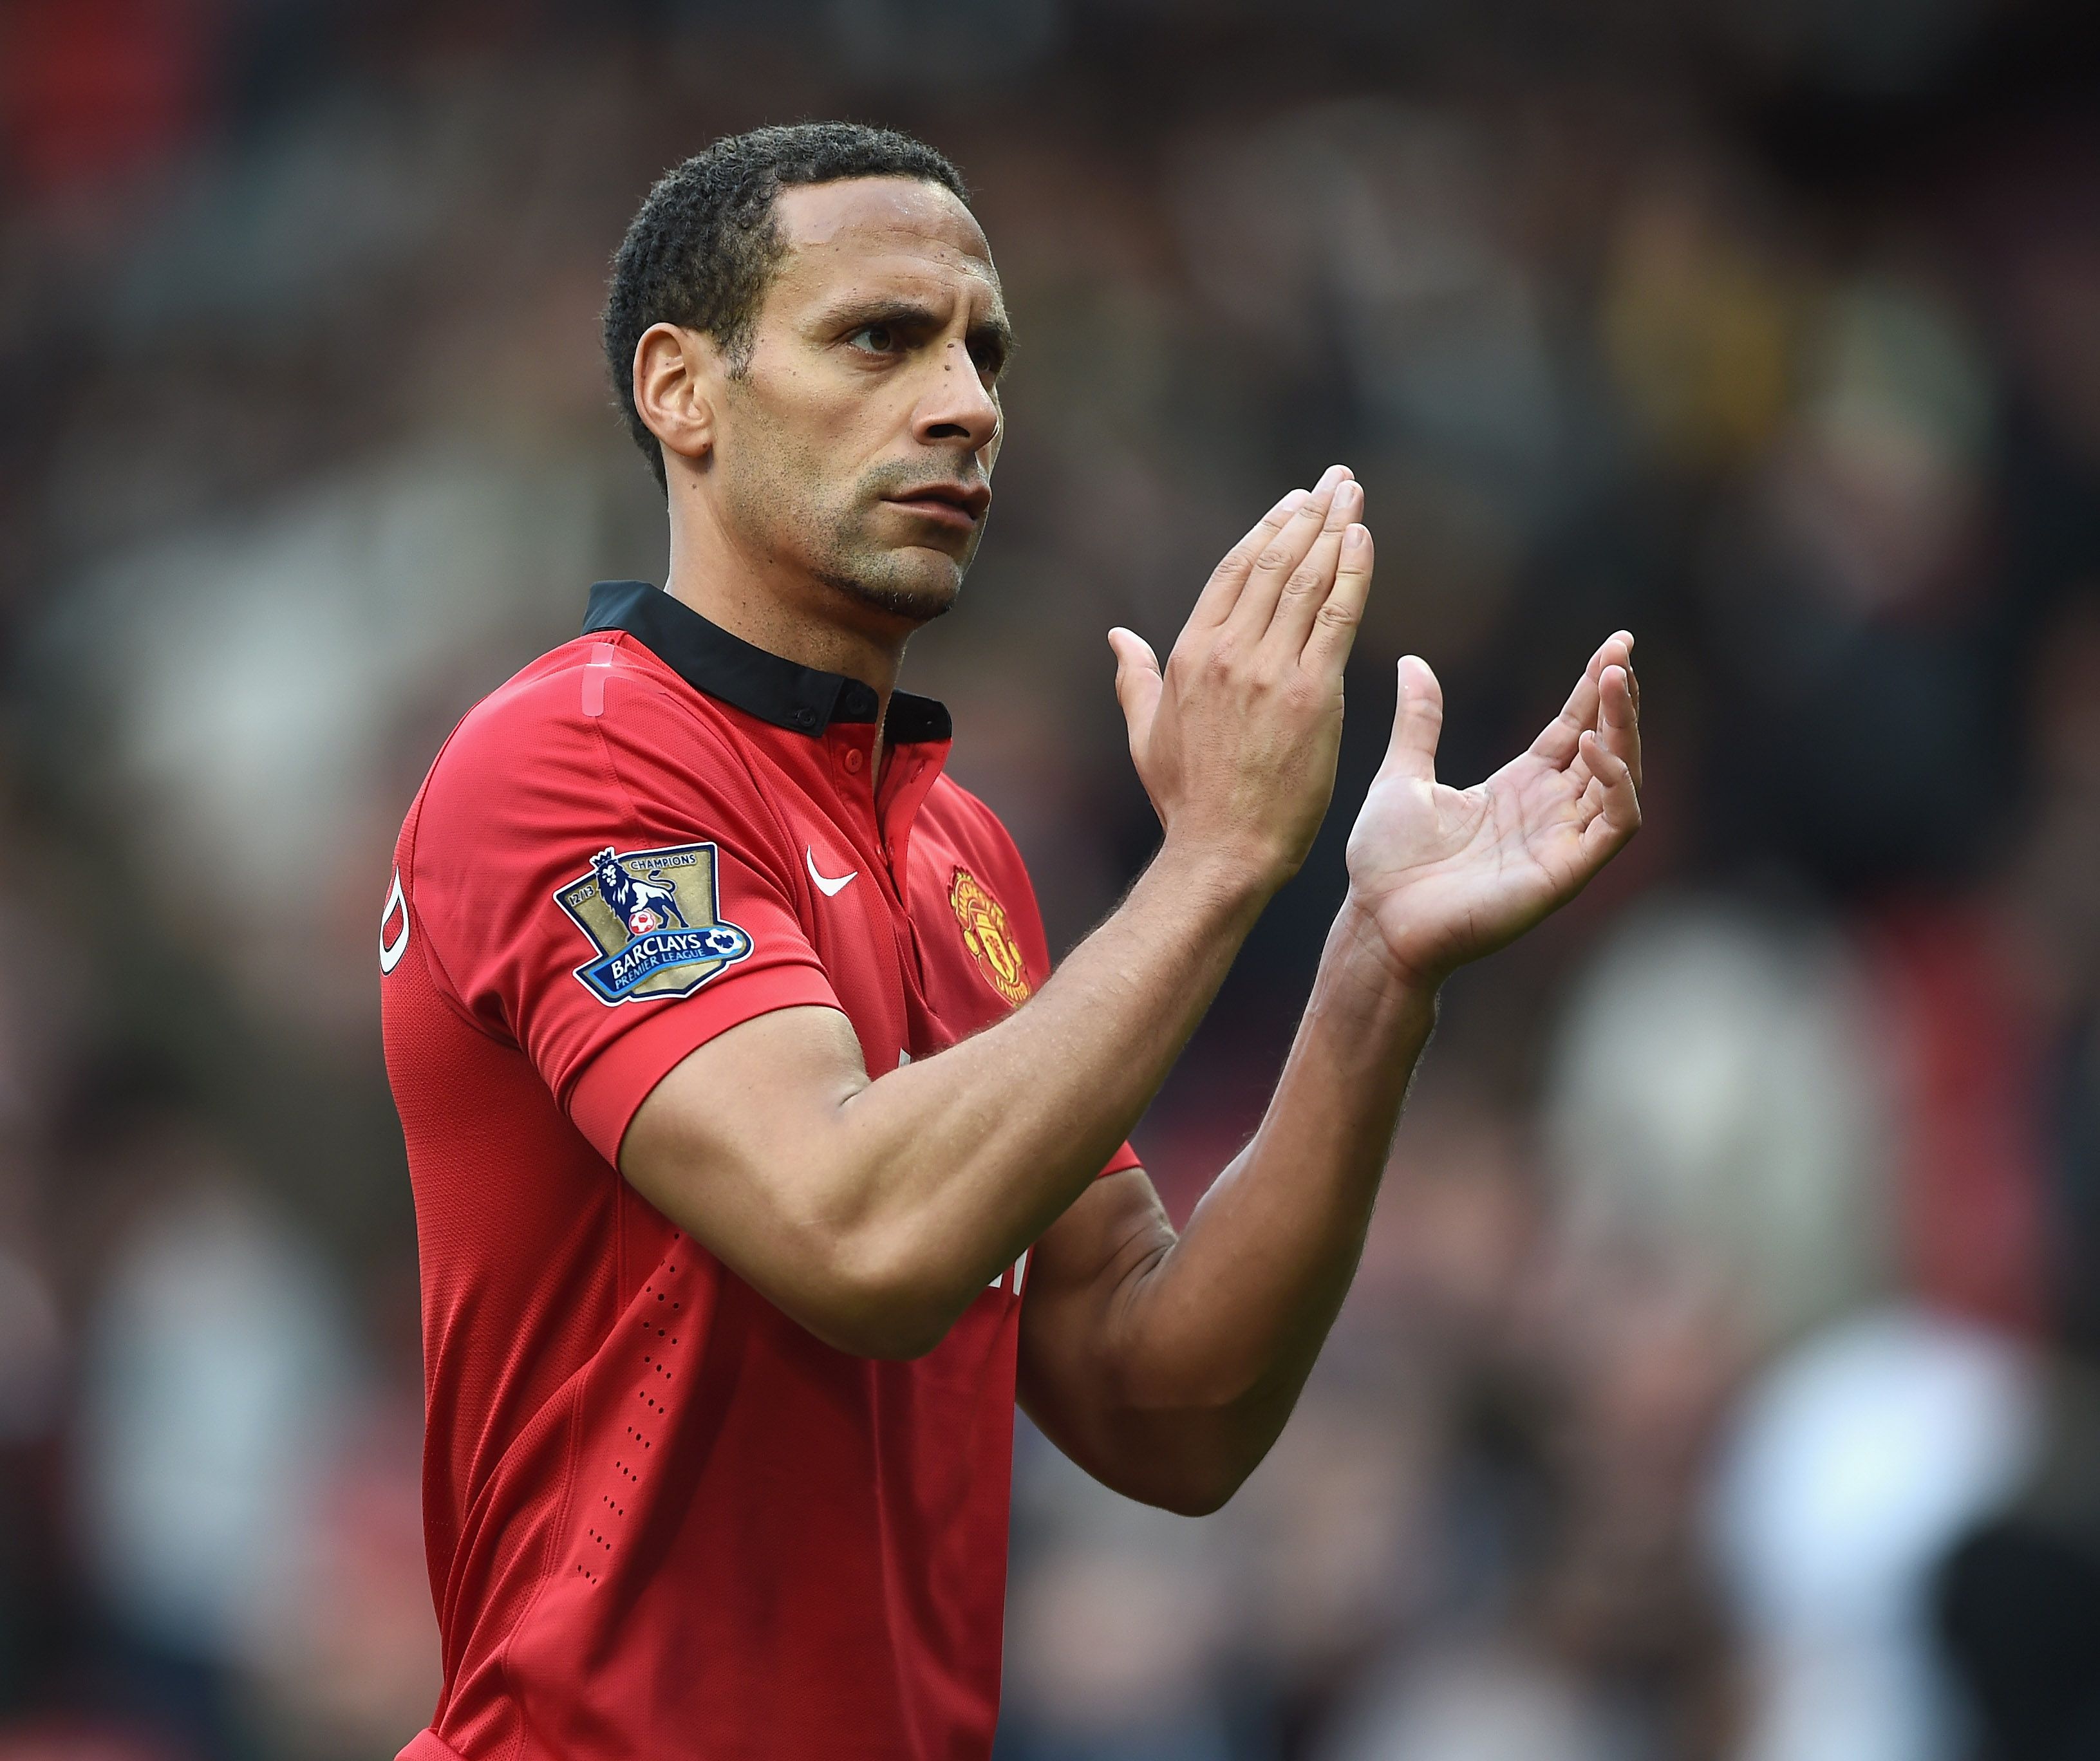 Rio Ferdinand of Manchester United applauds the fans after the Barclays Premier League match between Manchester United and Norwich City at Old Trafford on April 26, 2014 in Manchester, England.